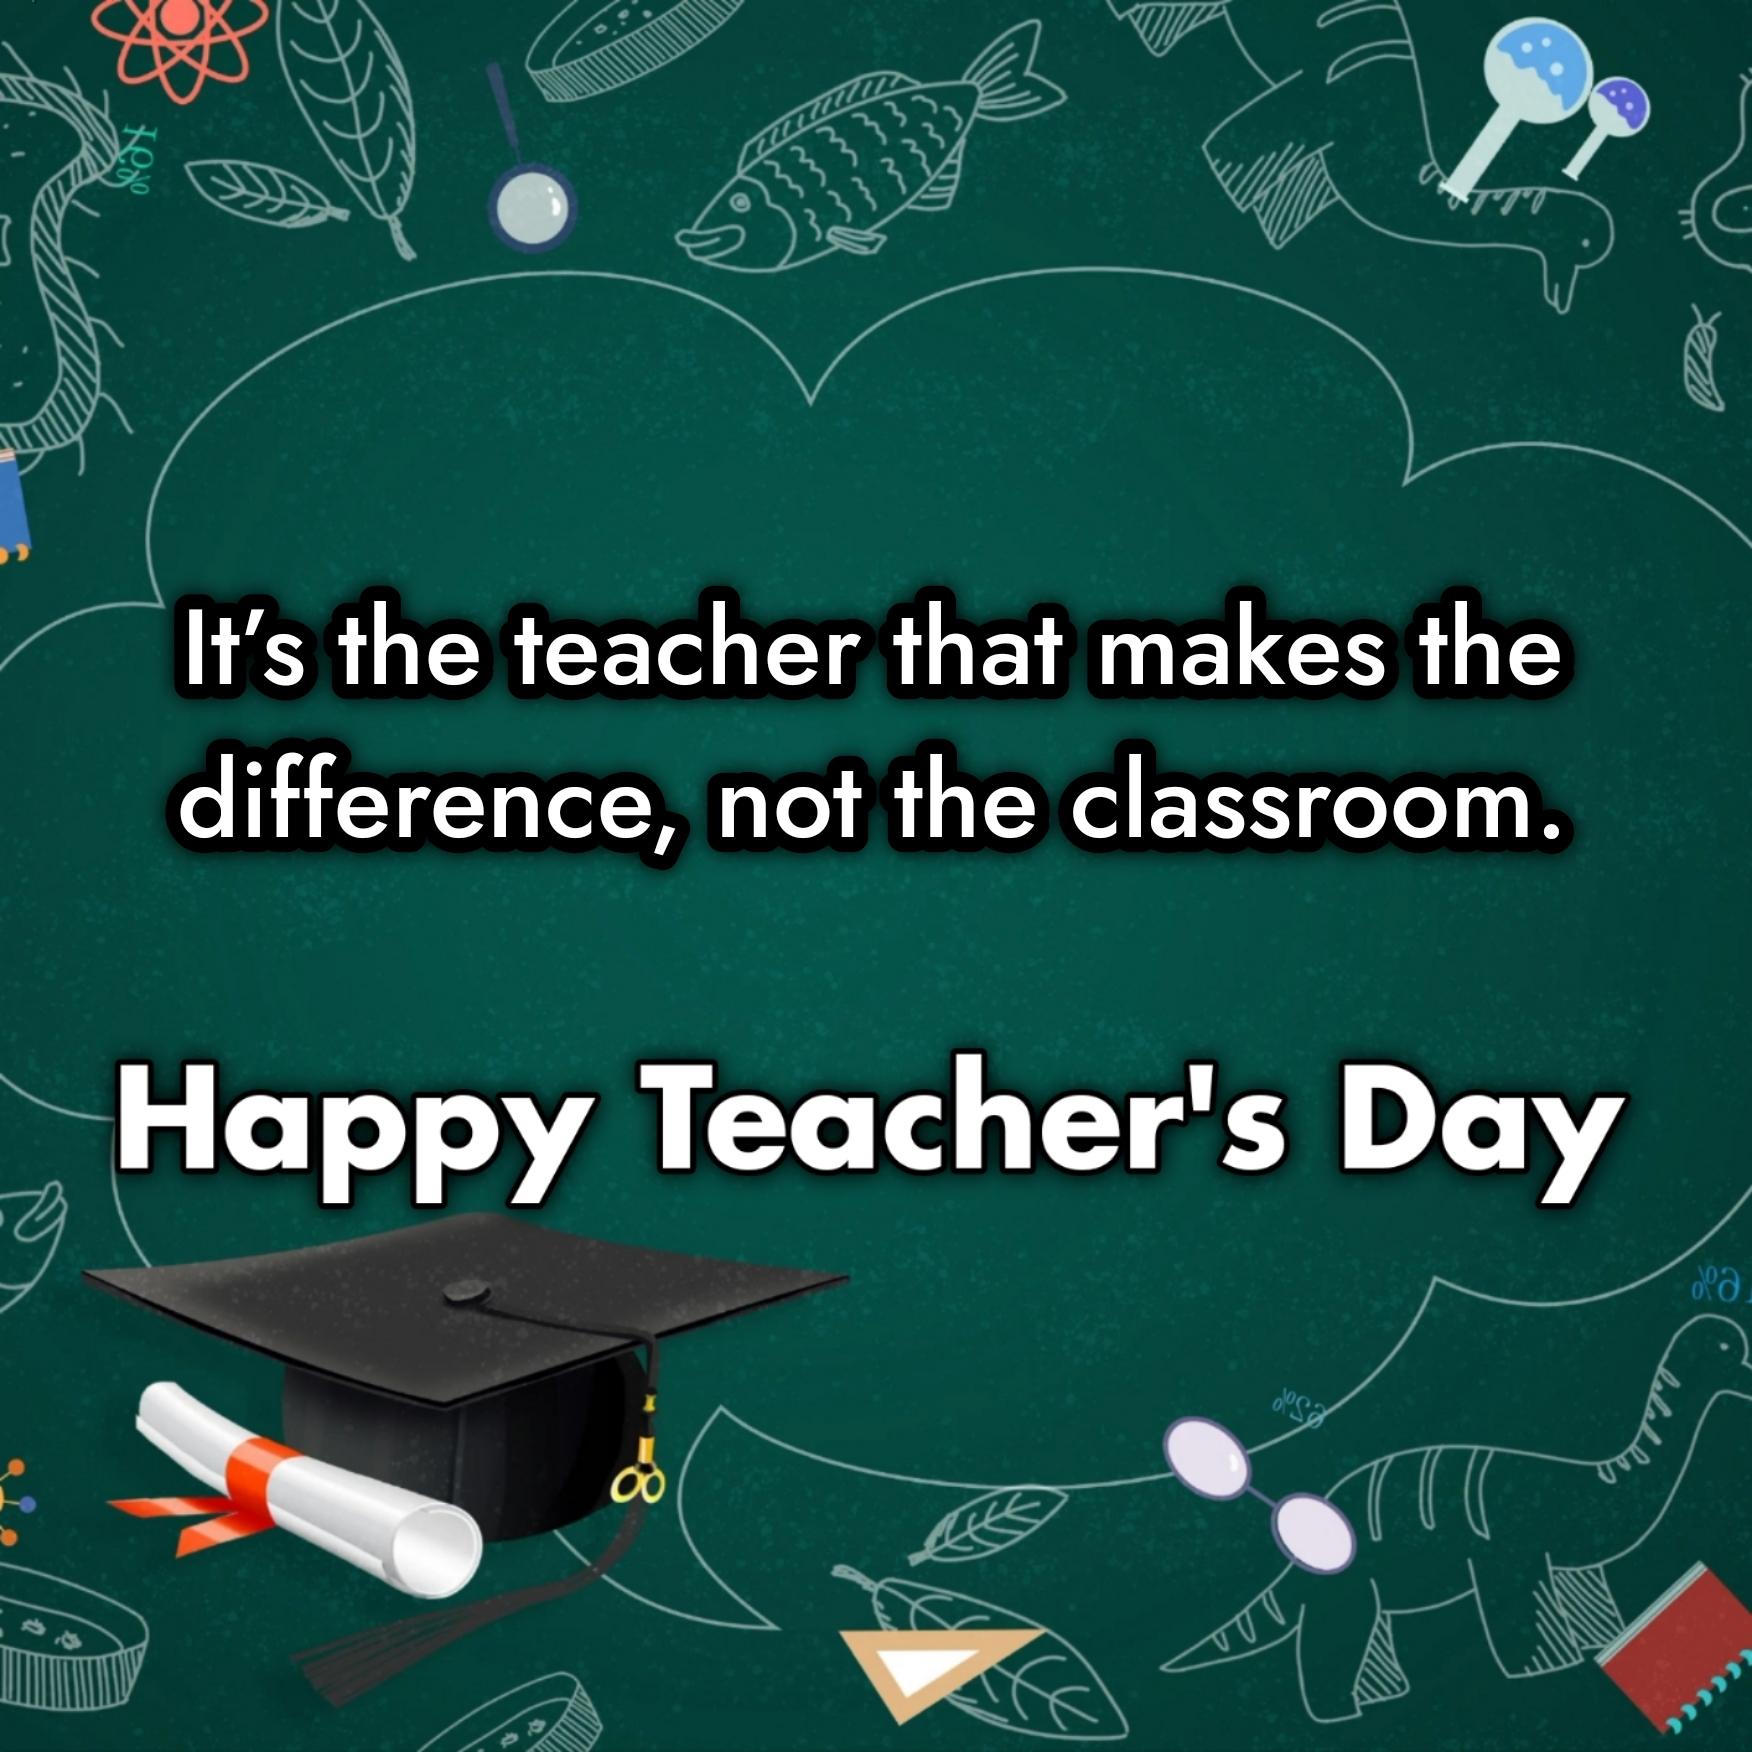 It’s the teacher that makes the difference